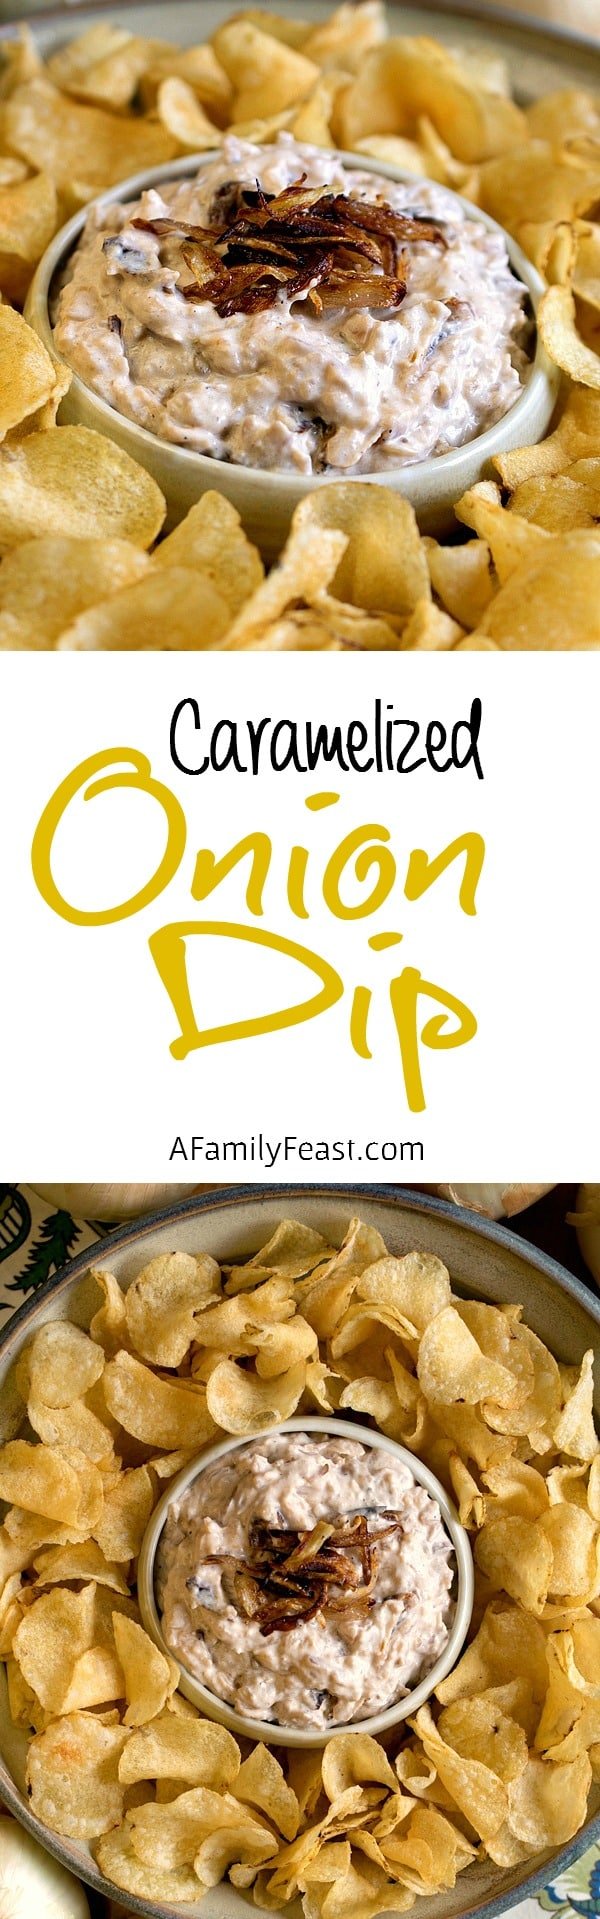 Caramelized Onion Dip - You'll never use a mix again once you make this homemade onion dip!